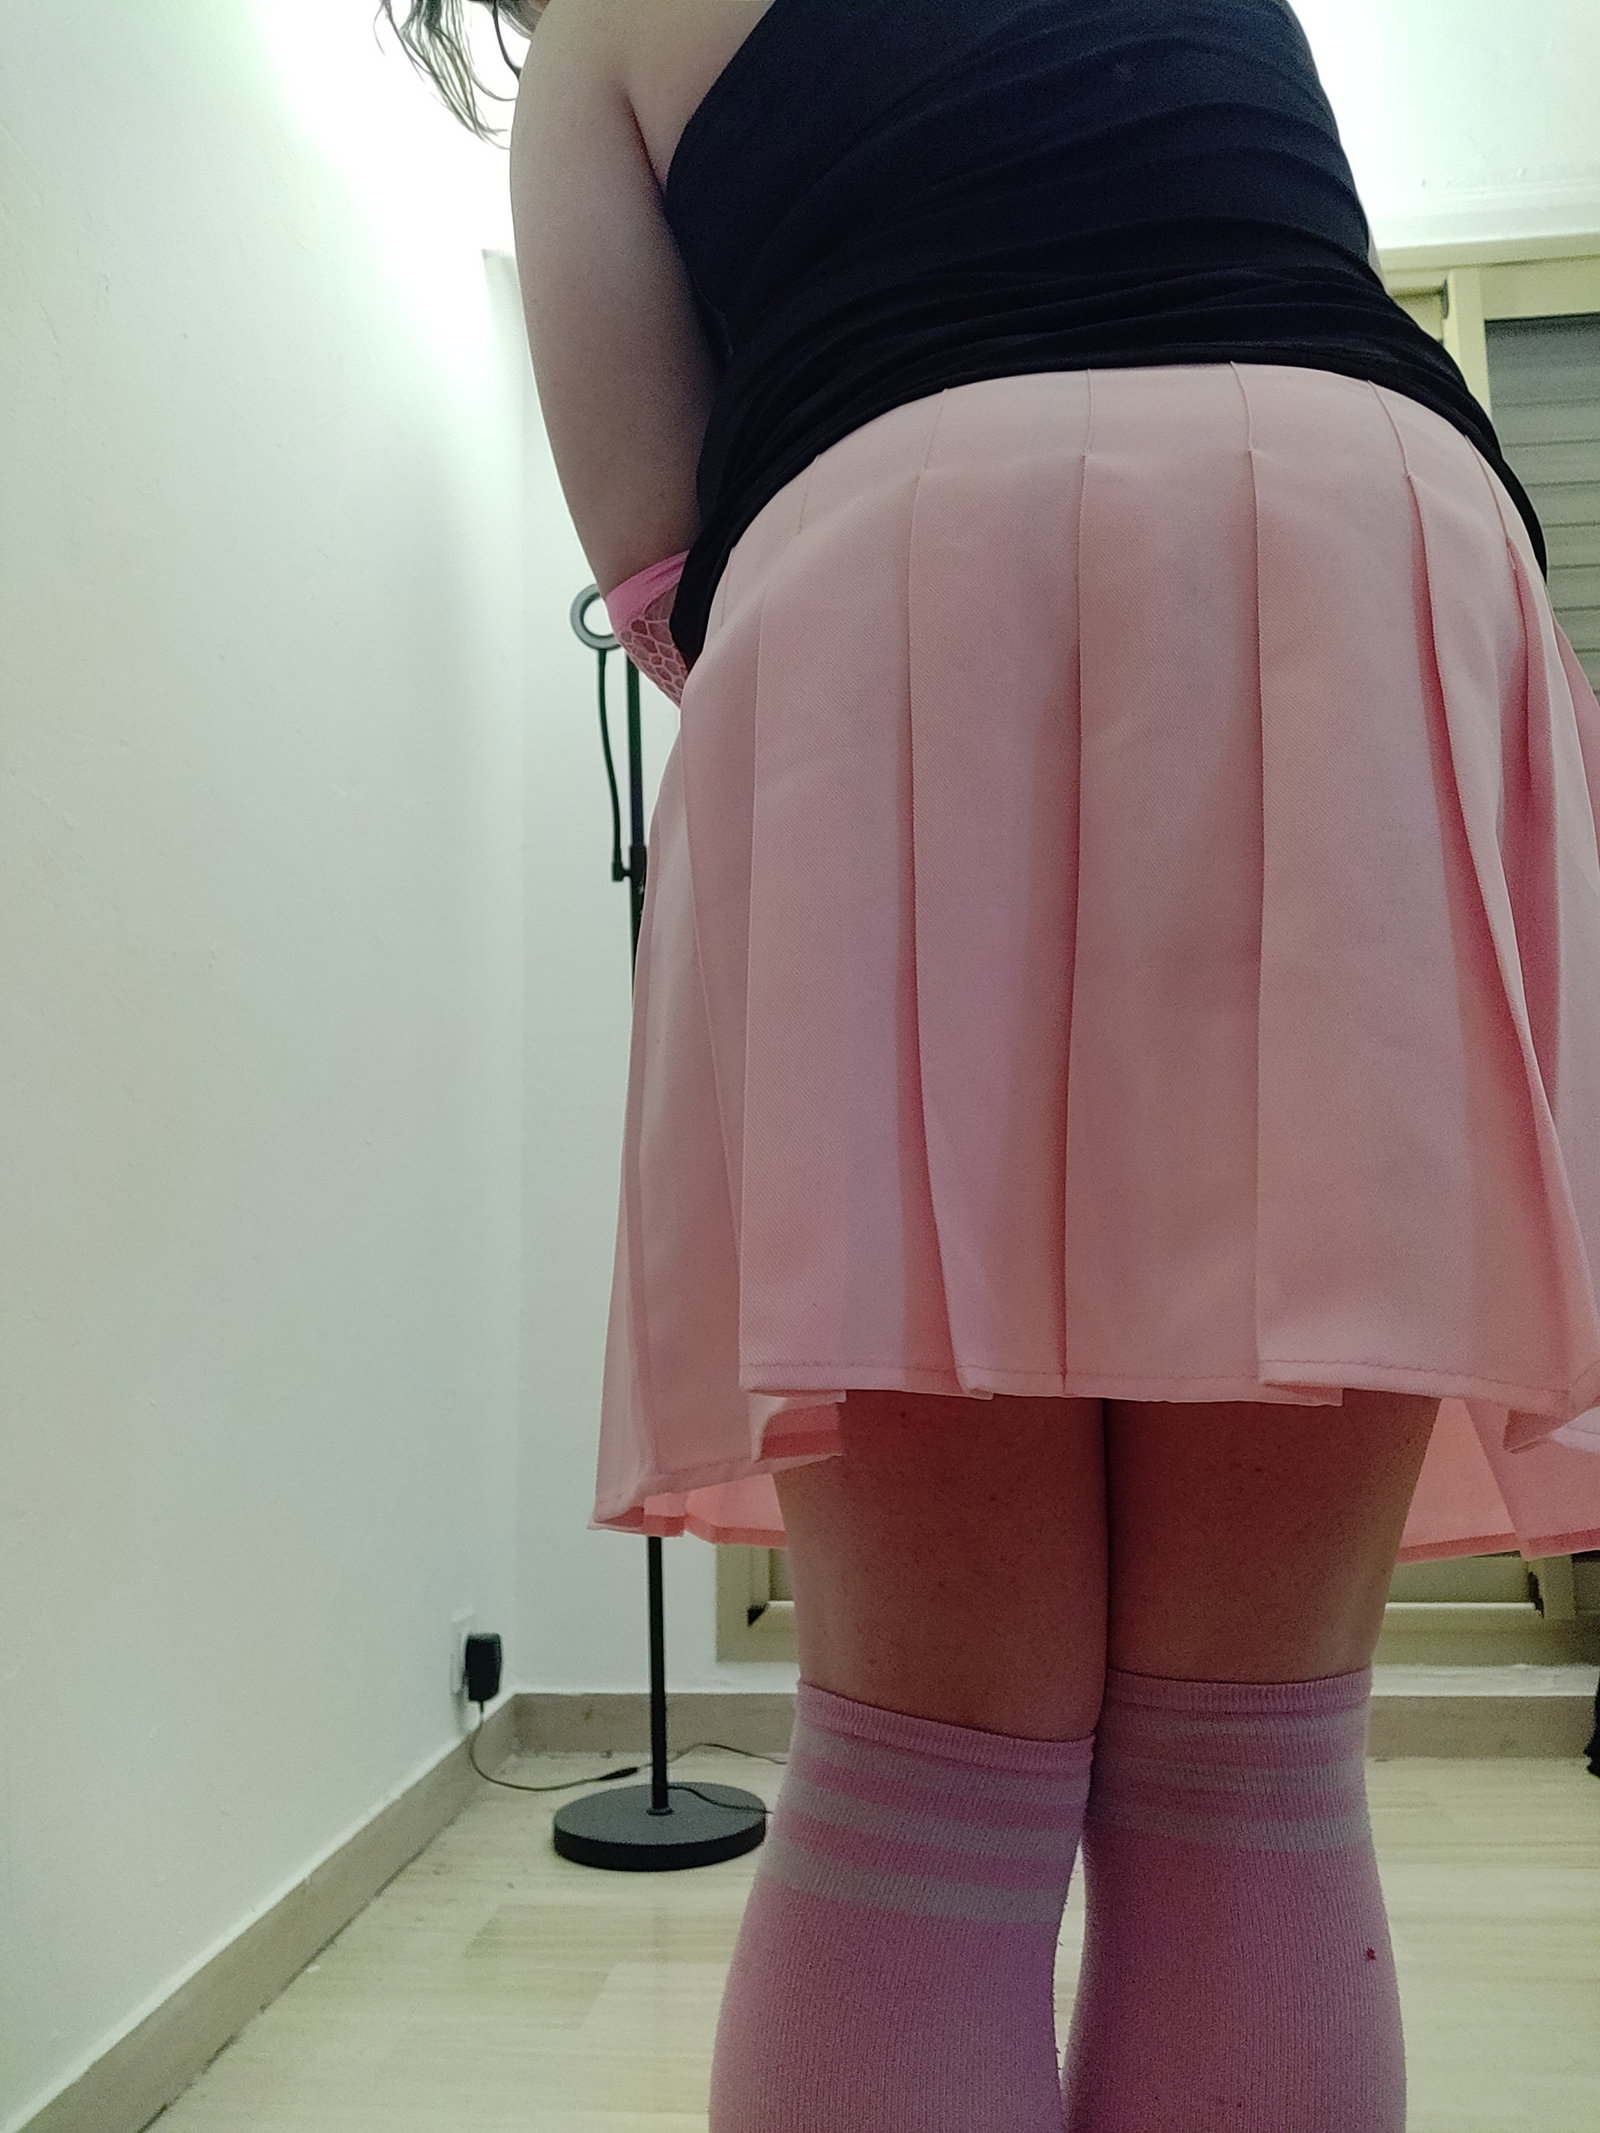 Photo by NikySissy with the username @NikySissy,  July 20, 2022 at 9:30 PM. The post is about the topic Crossdressers